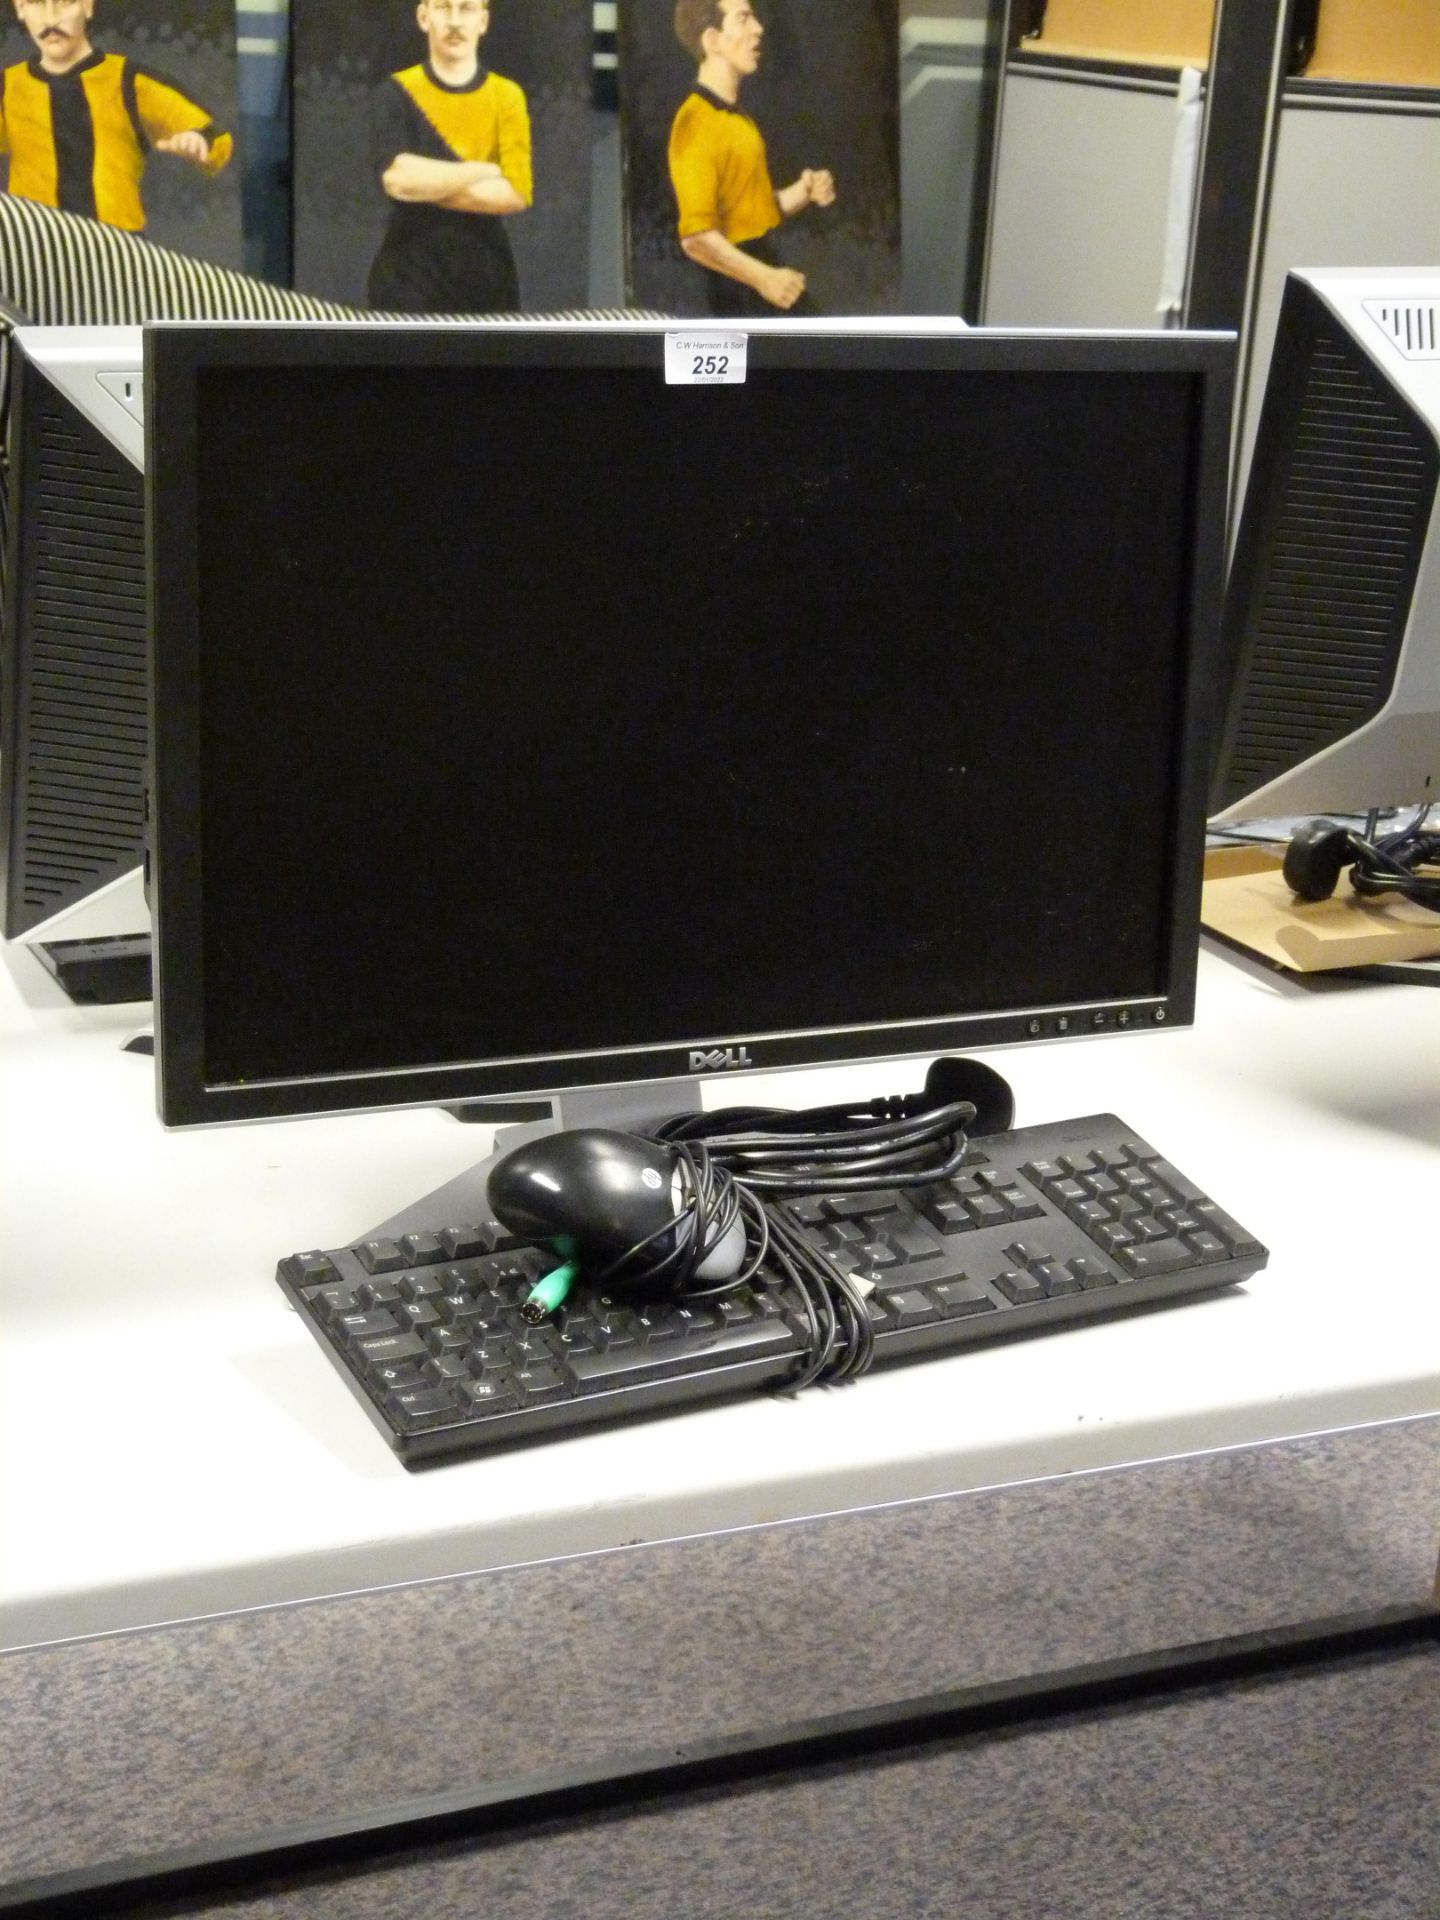 Dell monitor together with keyboard and mouse